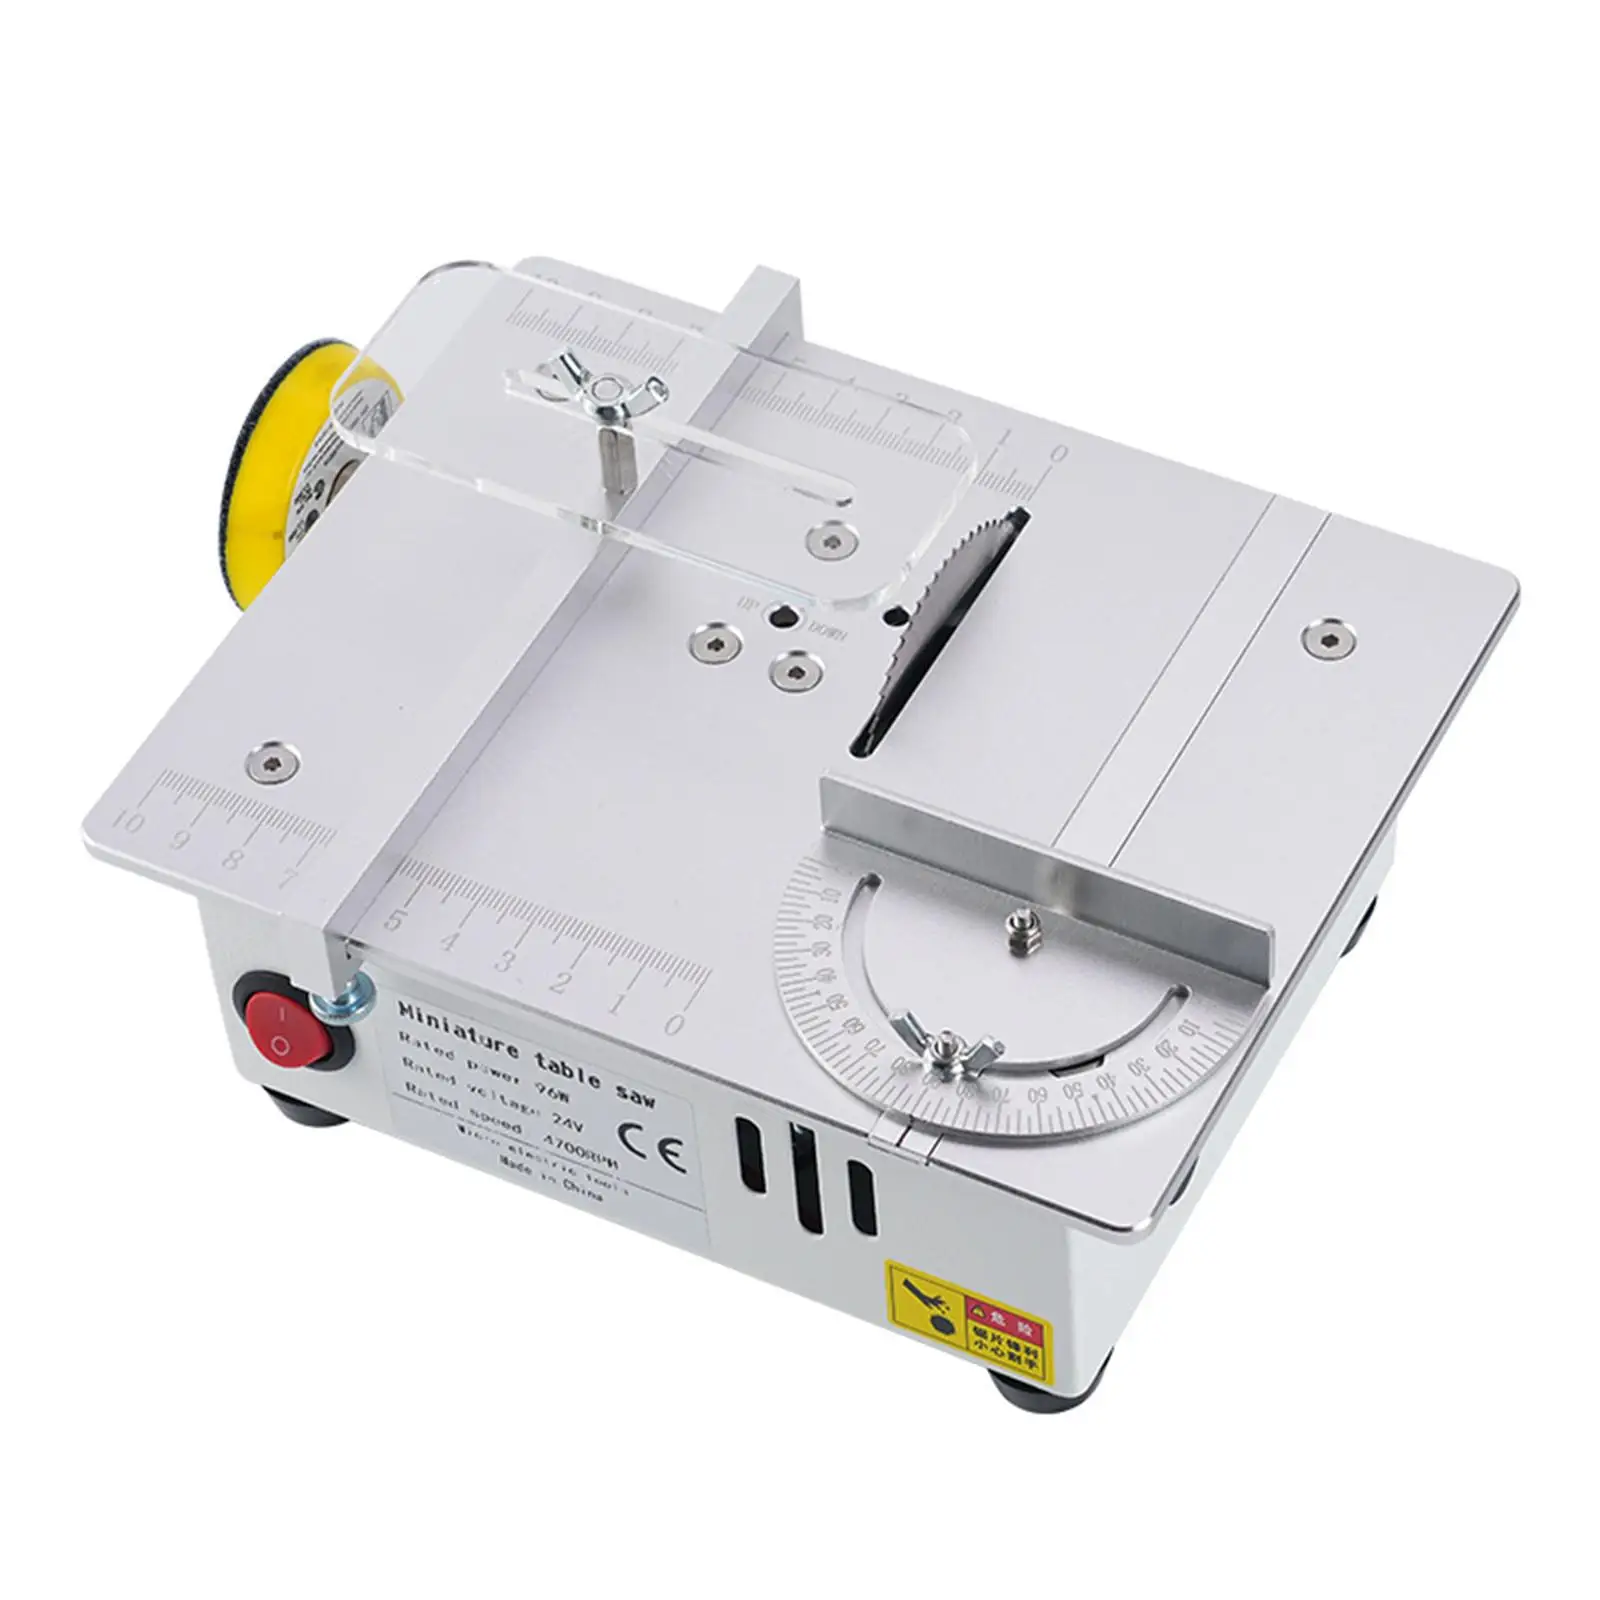 Mini Table Saw 96W 7 Speed Adjustable with Hose Electric Machine for DIY Woodworking Acrylic Cutting Hobbies Crafting US